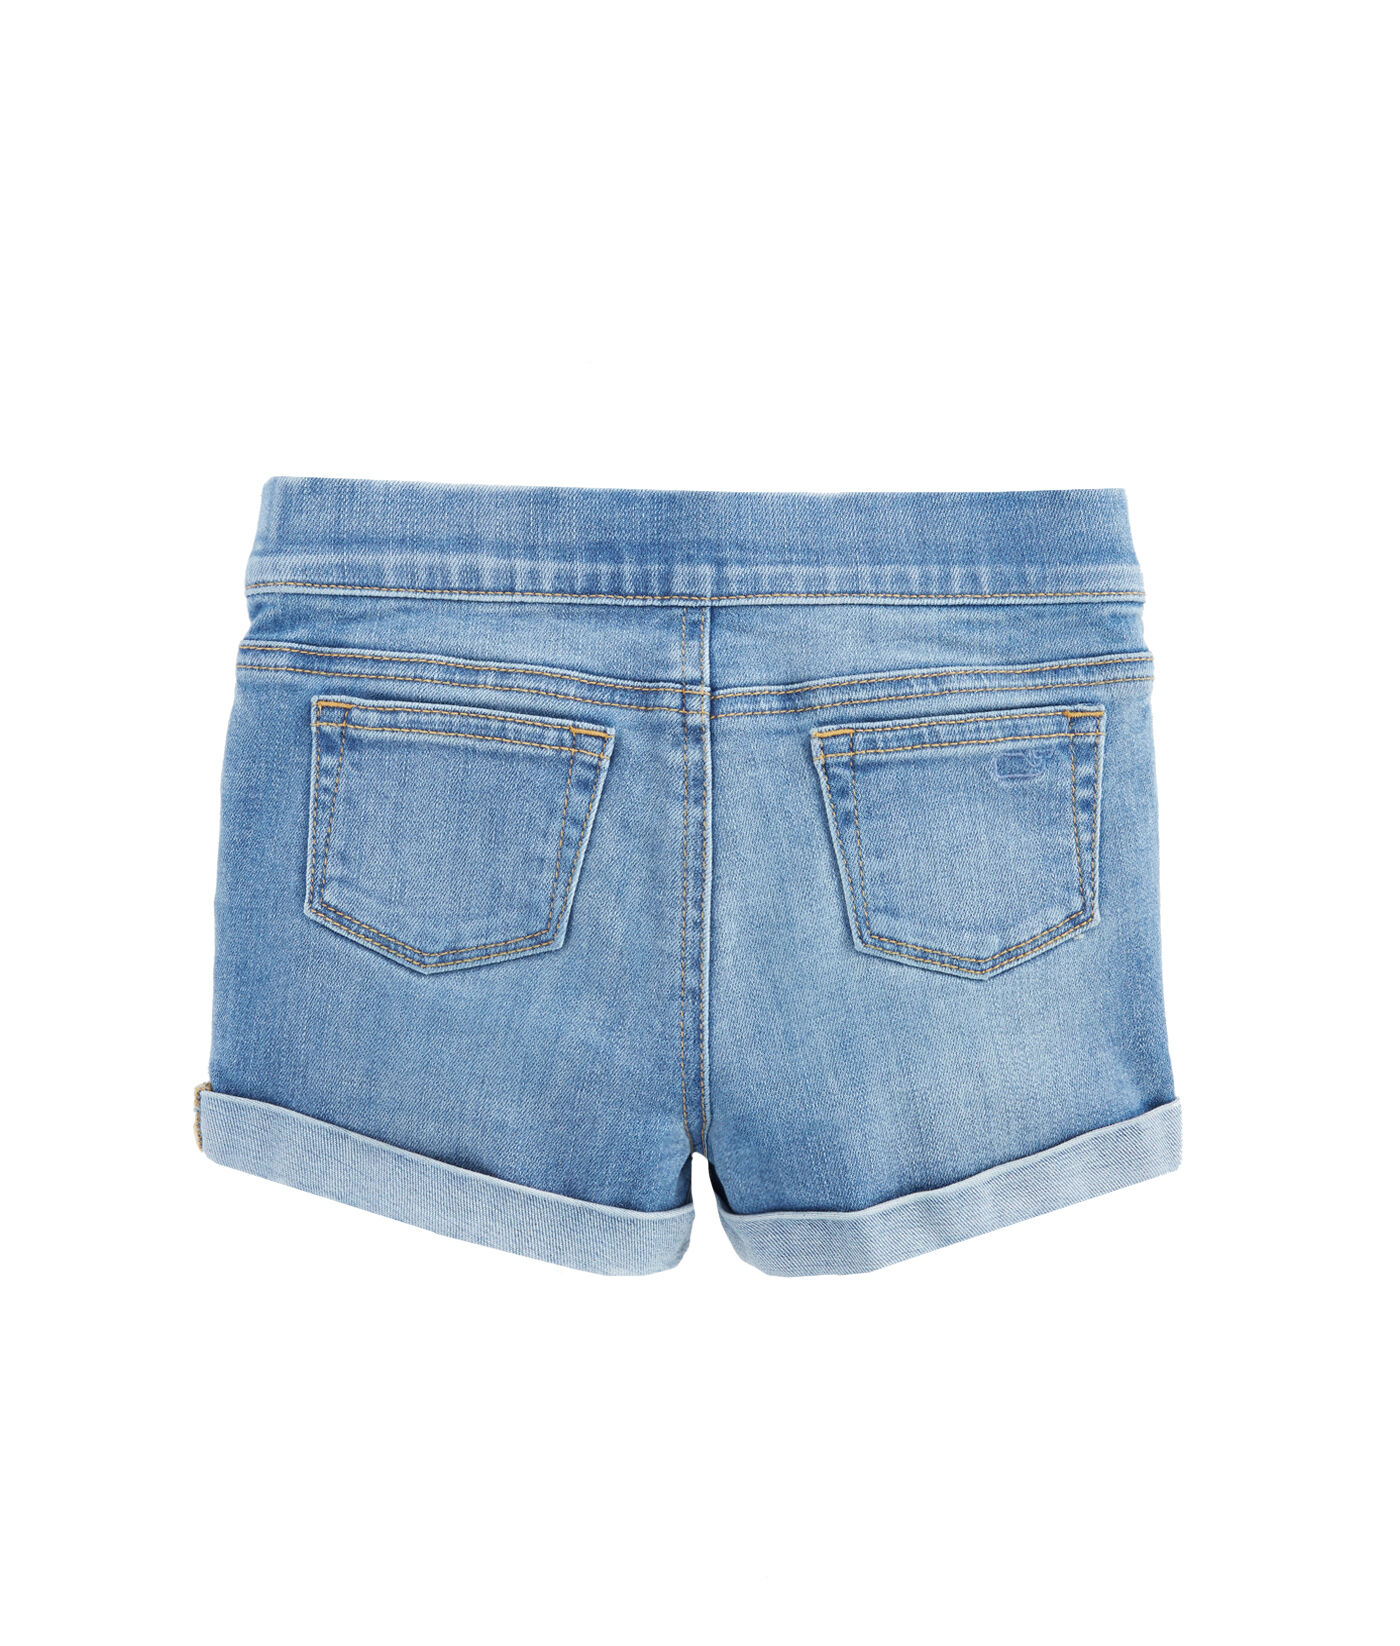 pull on jegging shorts